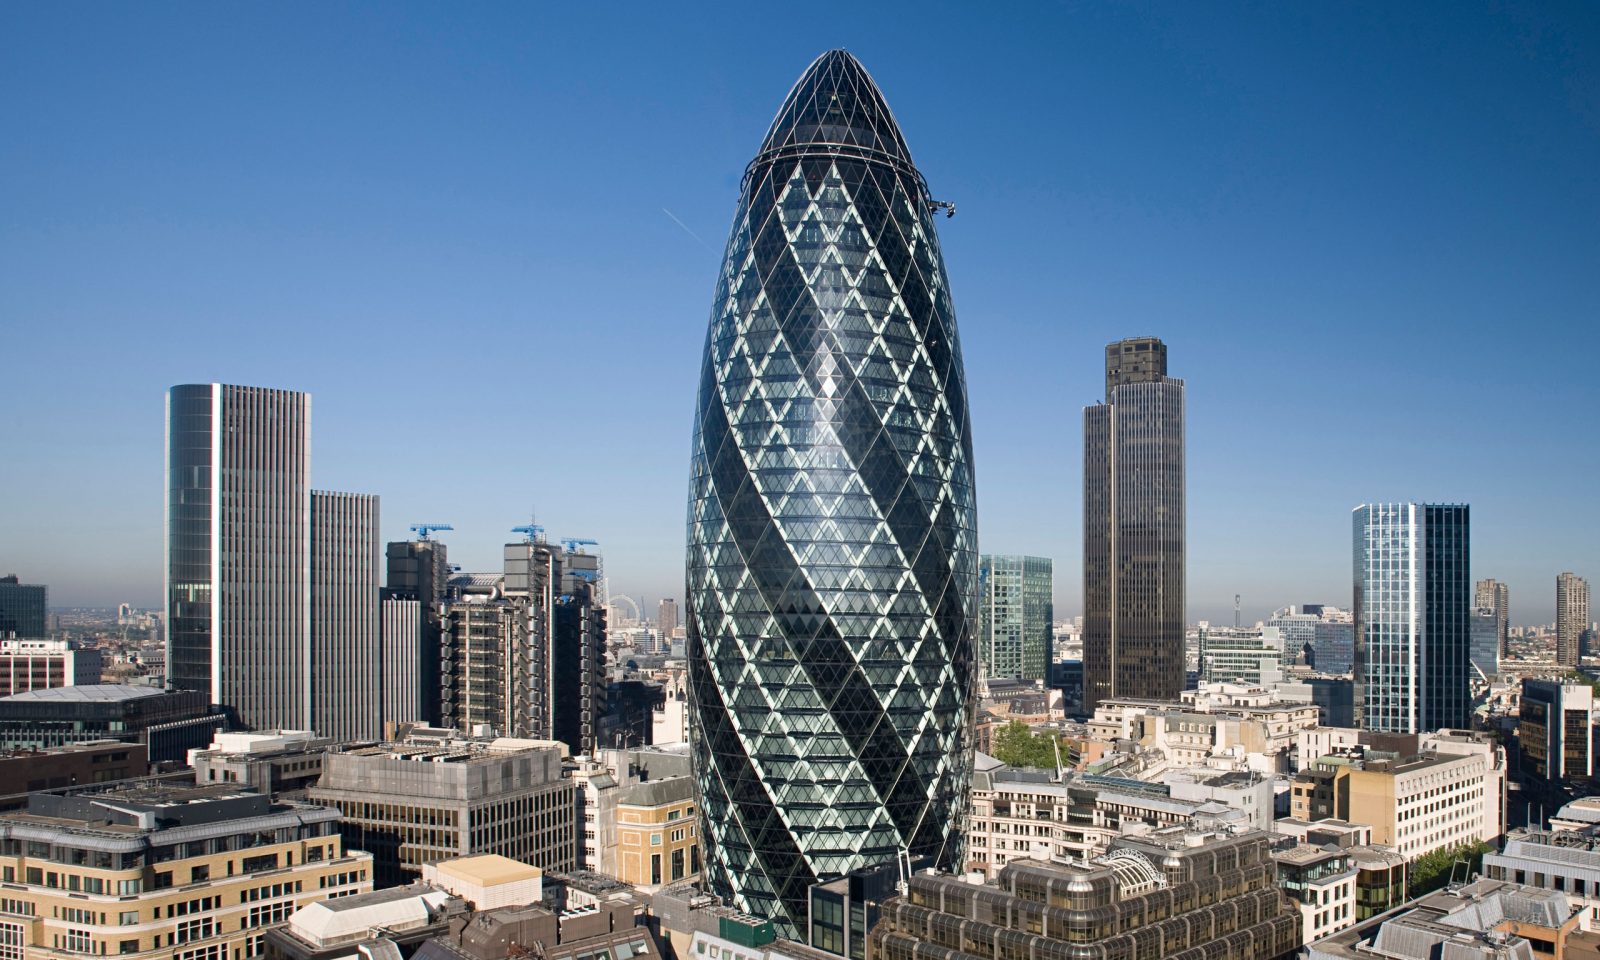 If You Can Score More Than 18 on This Famous Landmarks Quiz, You Probably Know All About the World Gherkin, London